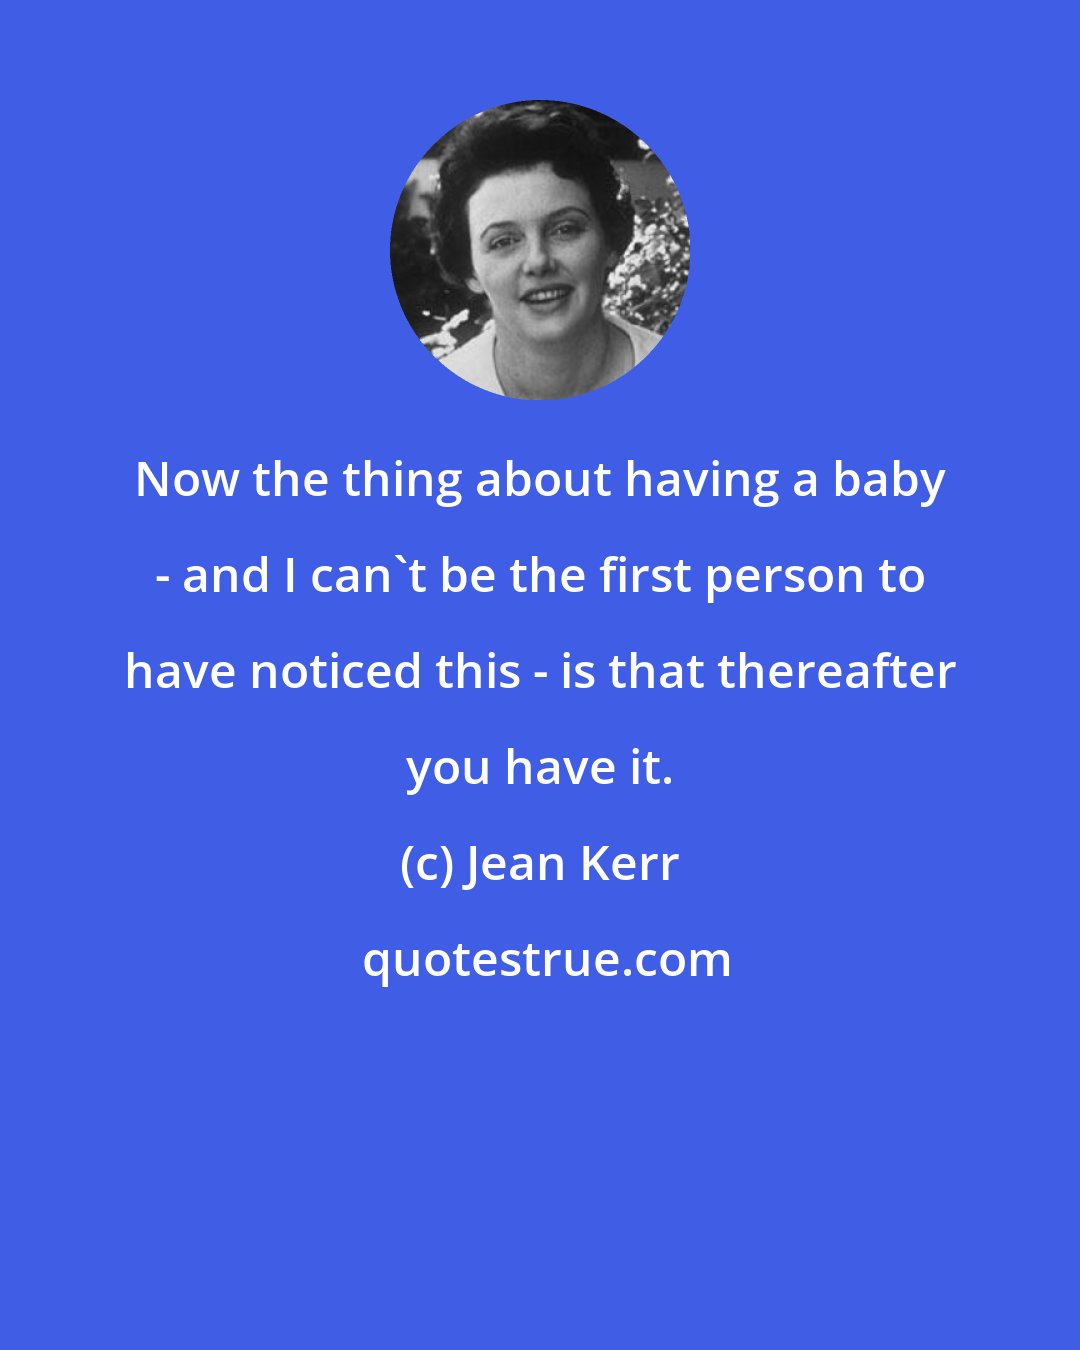 Jean Kerr: Now the thing about having a baby - and I can't be the first person to have noticed this - is that thereafter you have it.